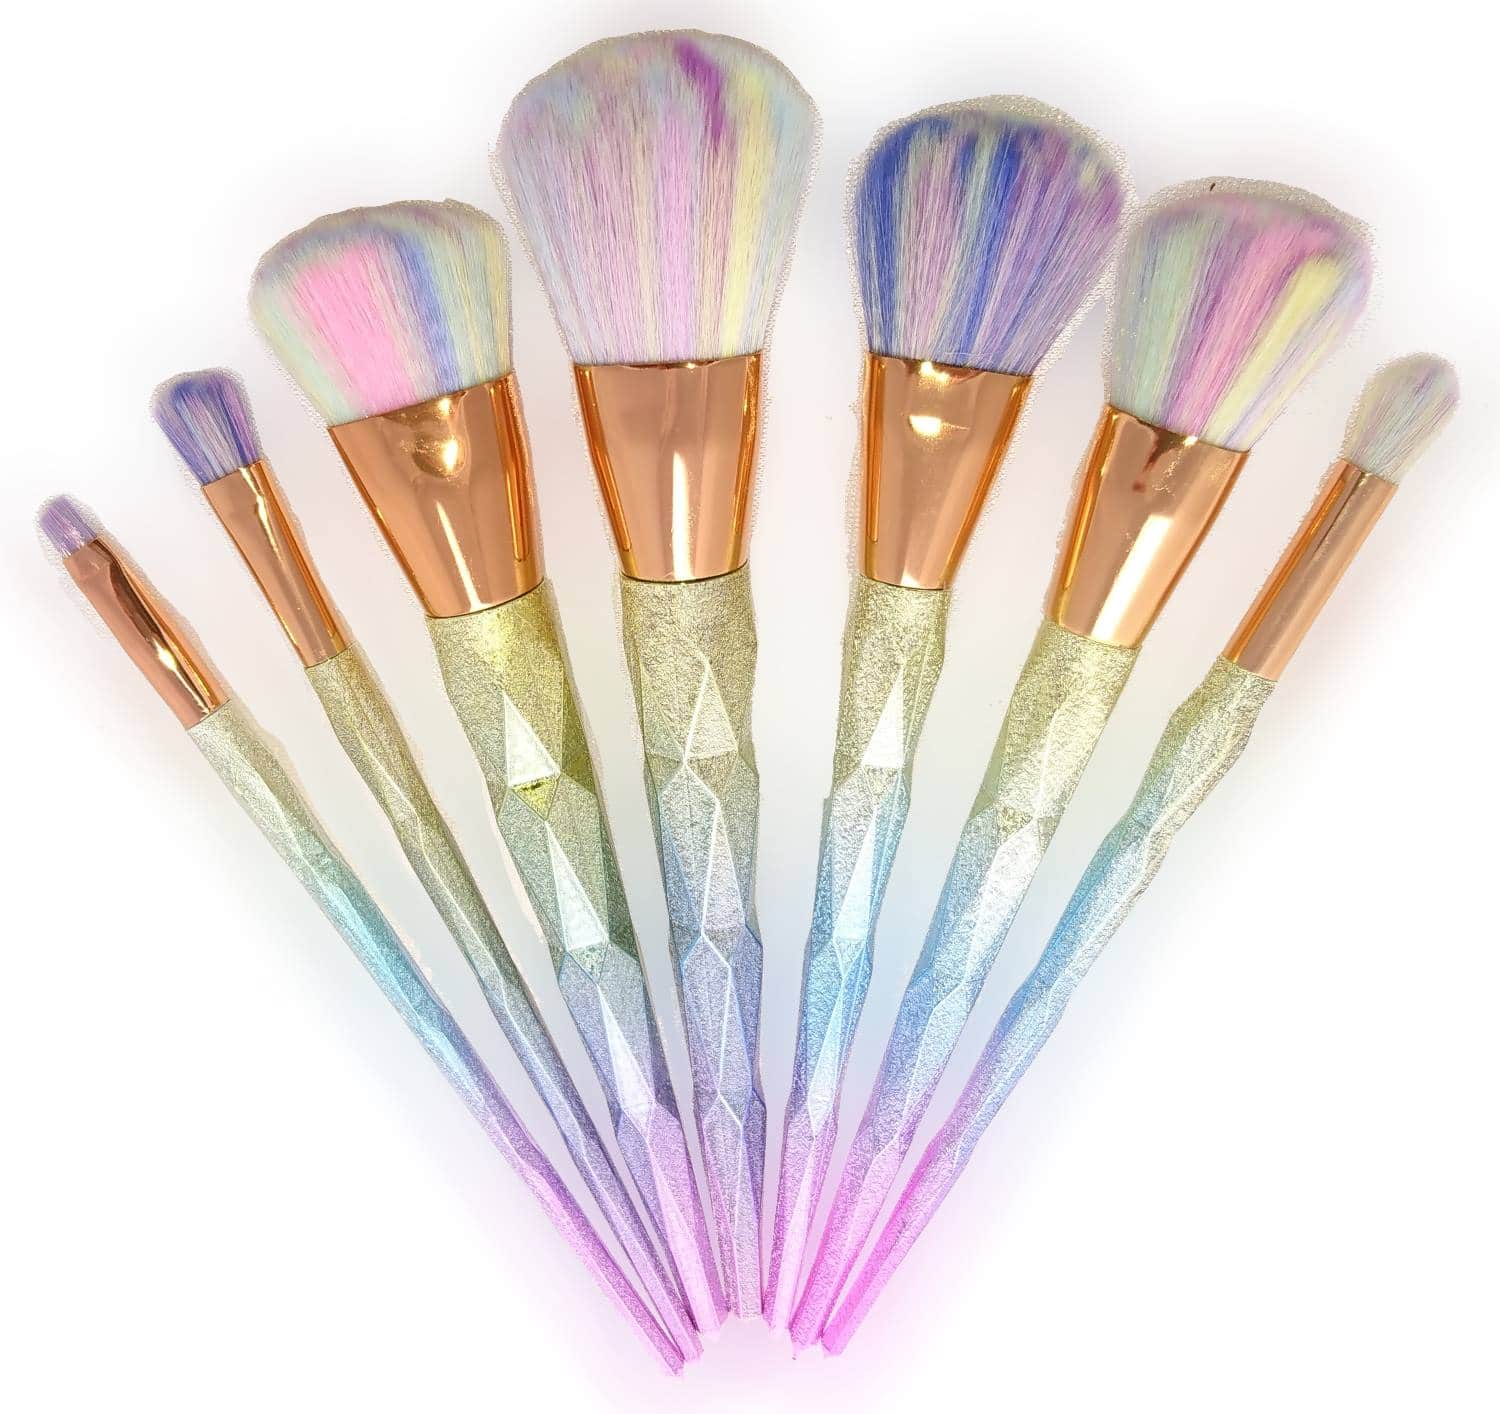 Glitter makeup brushes with market